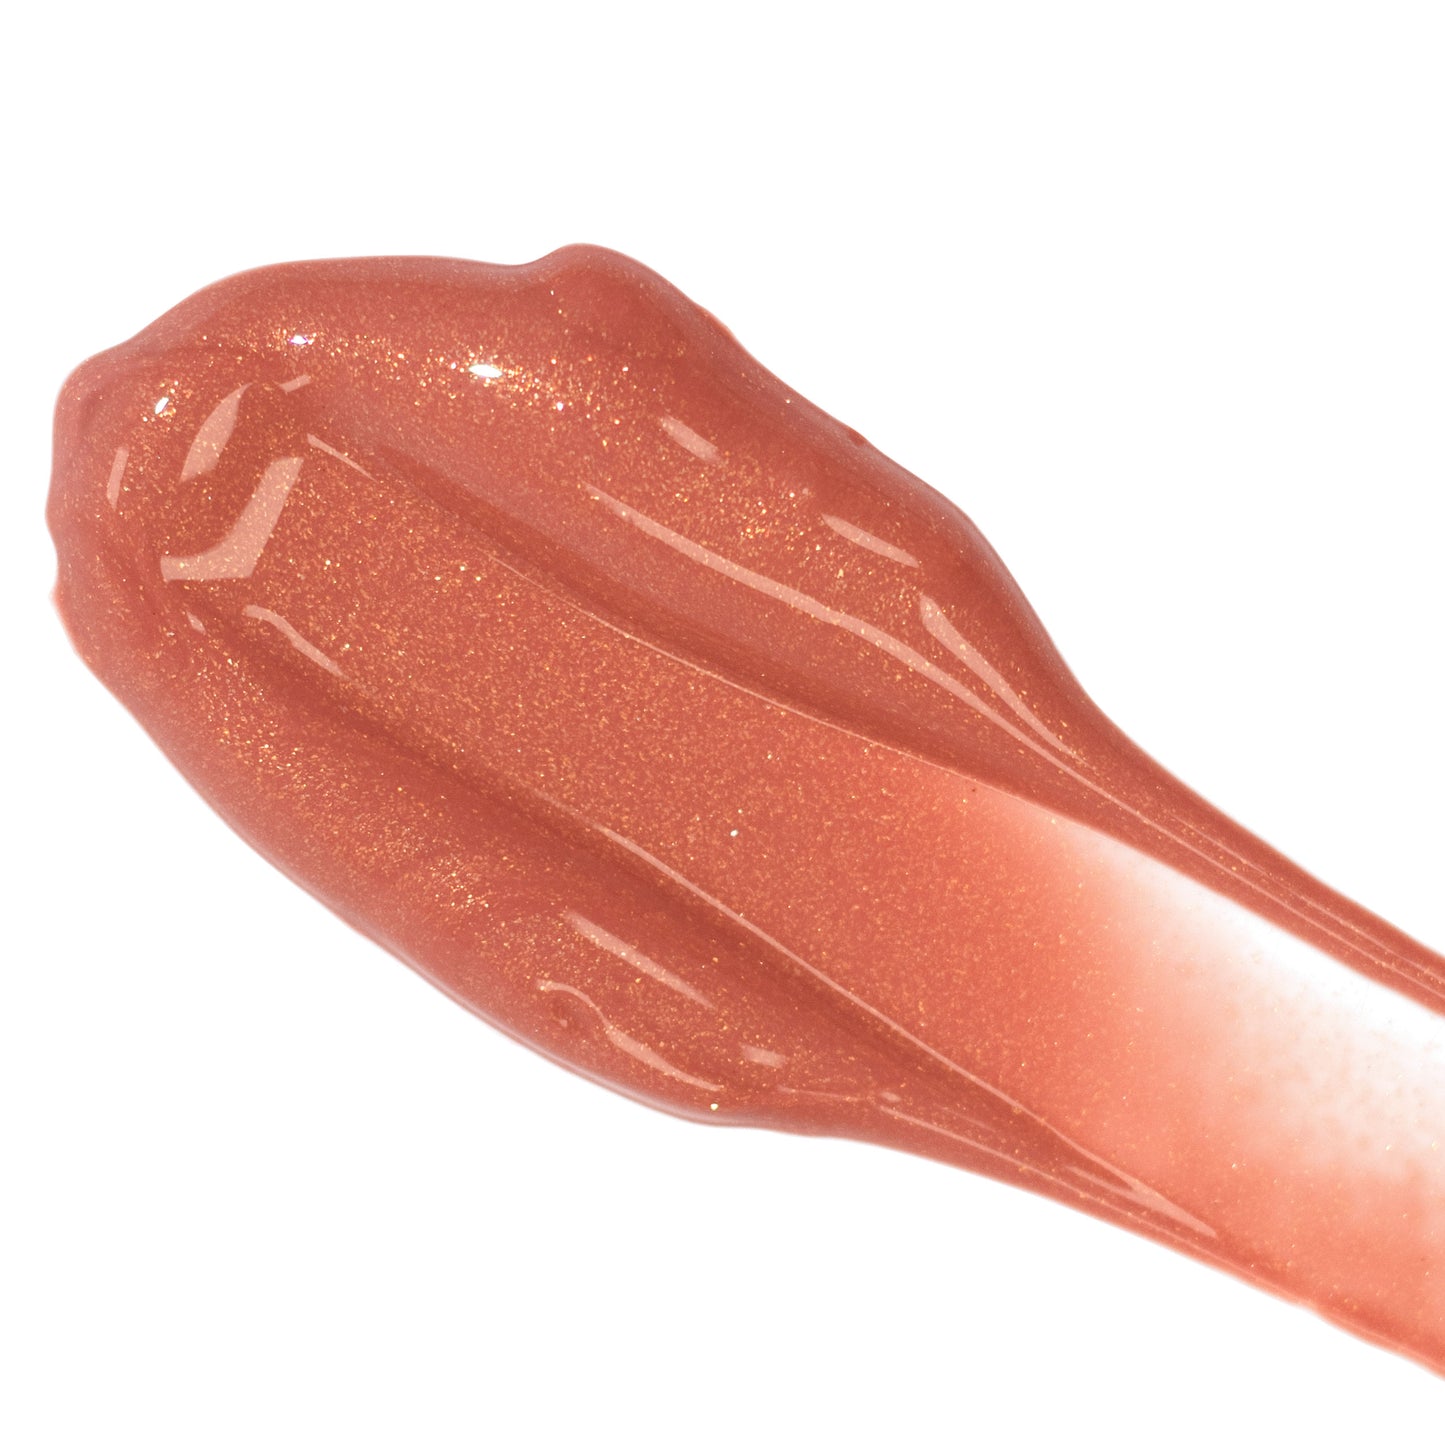 FitGlow Lip Serum - Beach Glow - Sheer Bronze colour  applied as a smear of lip serum onto a white background